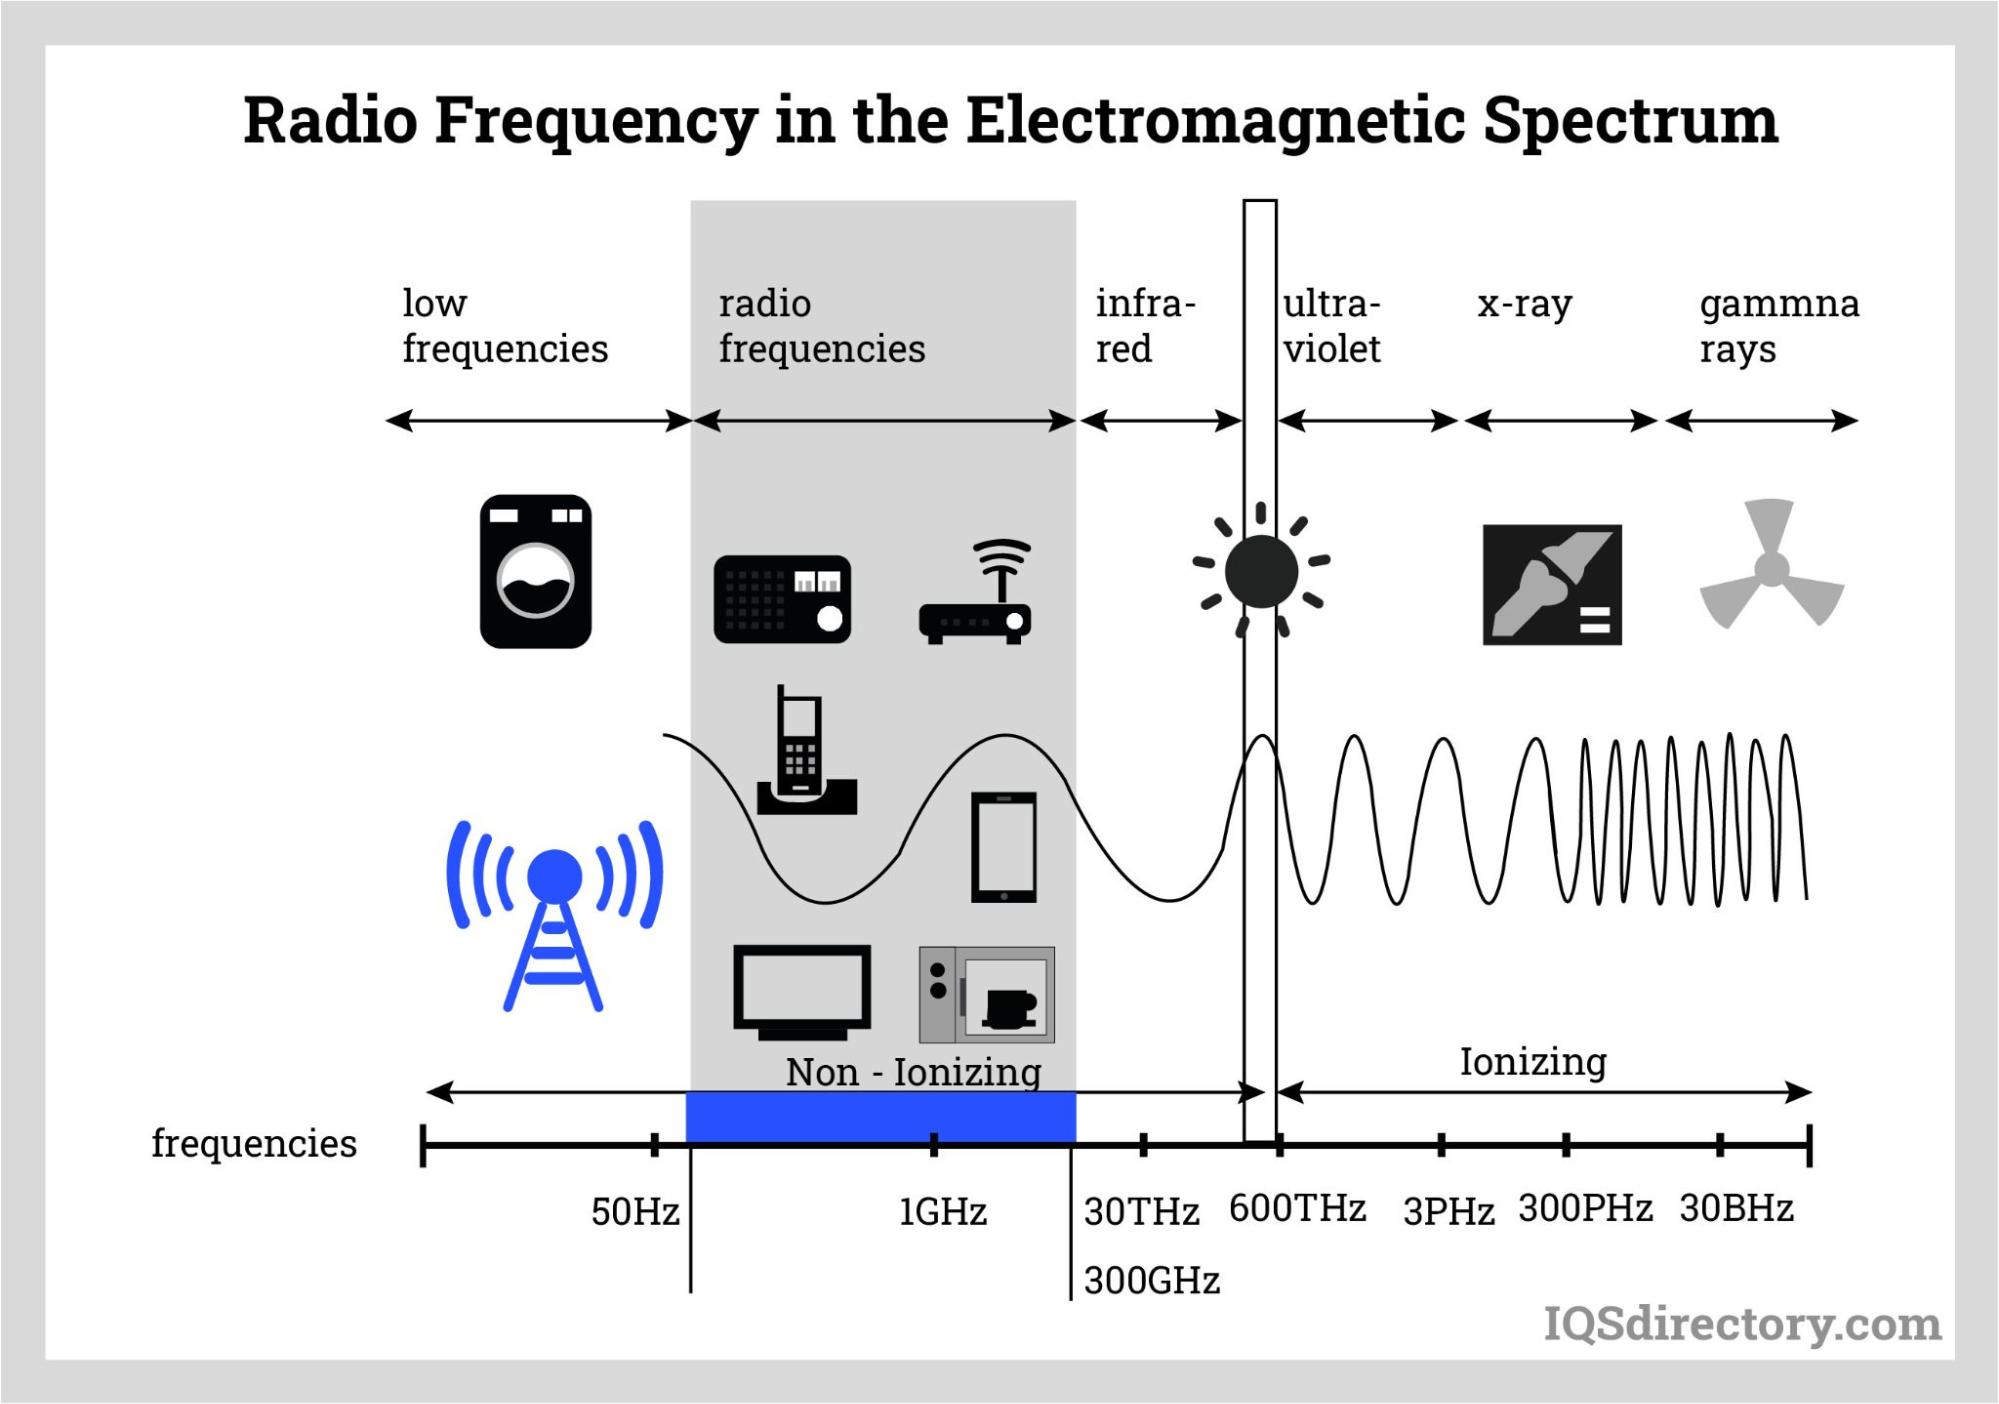 Radio Frequency in the Electromagnetic Spectrum